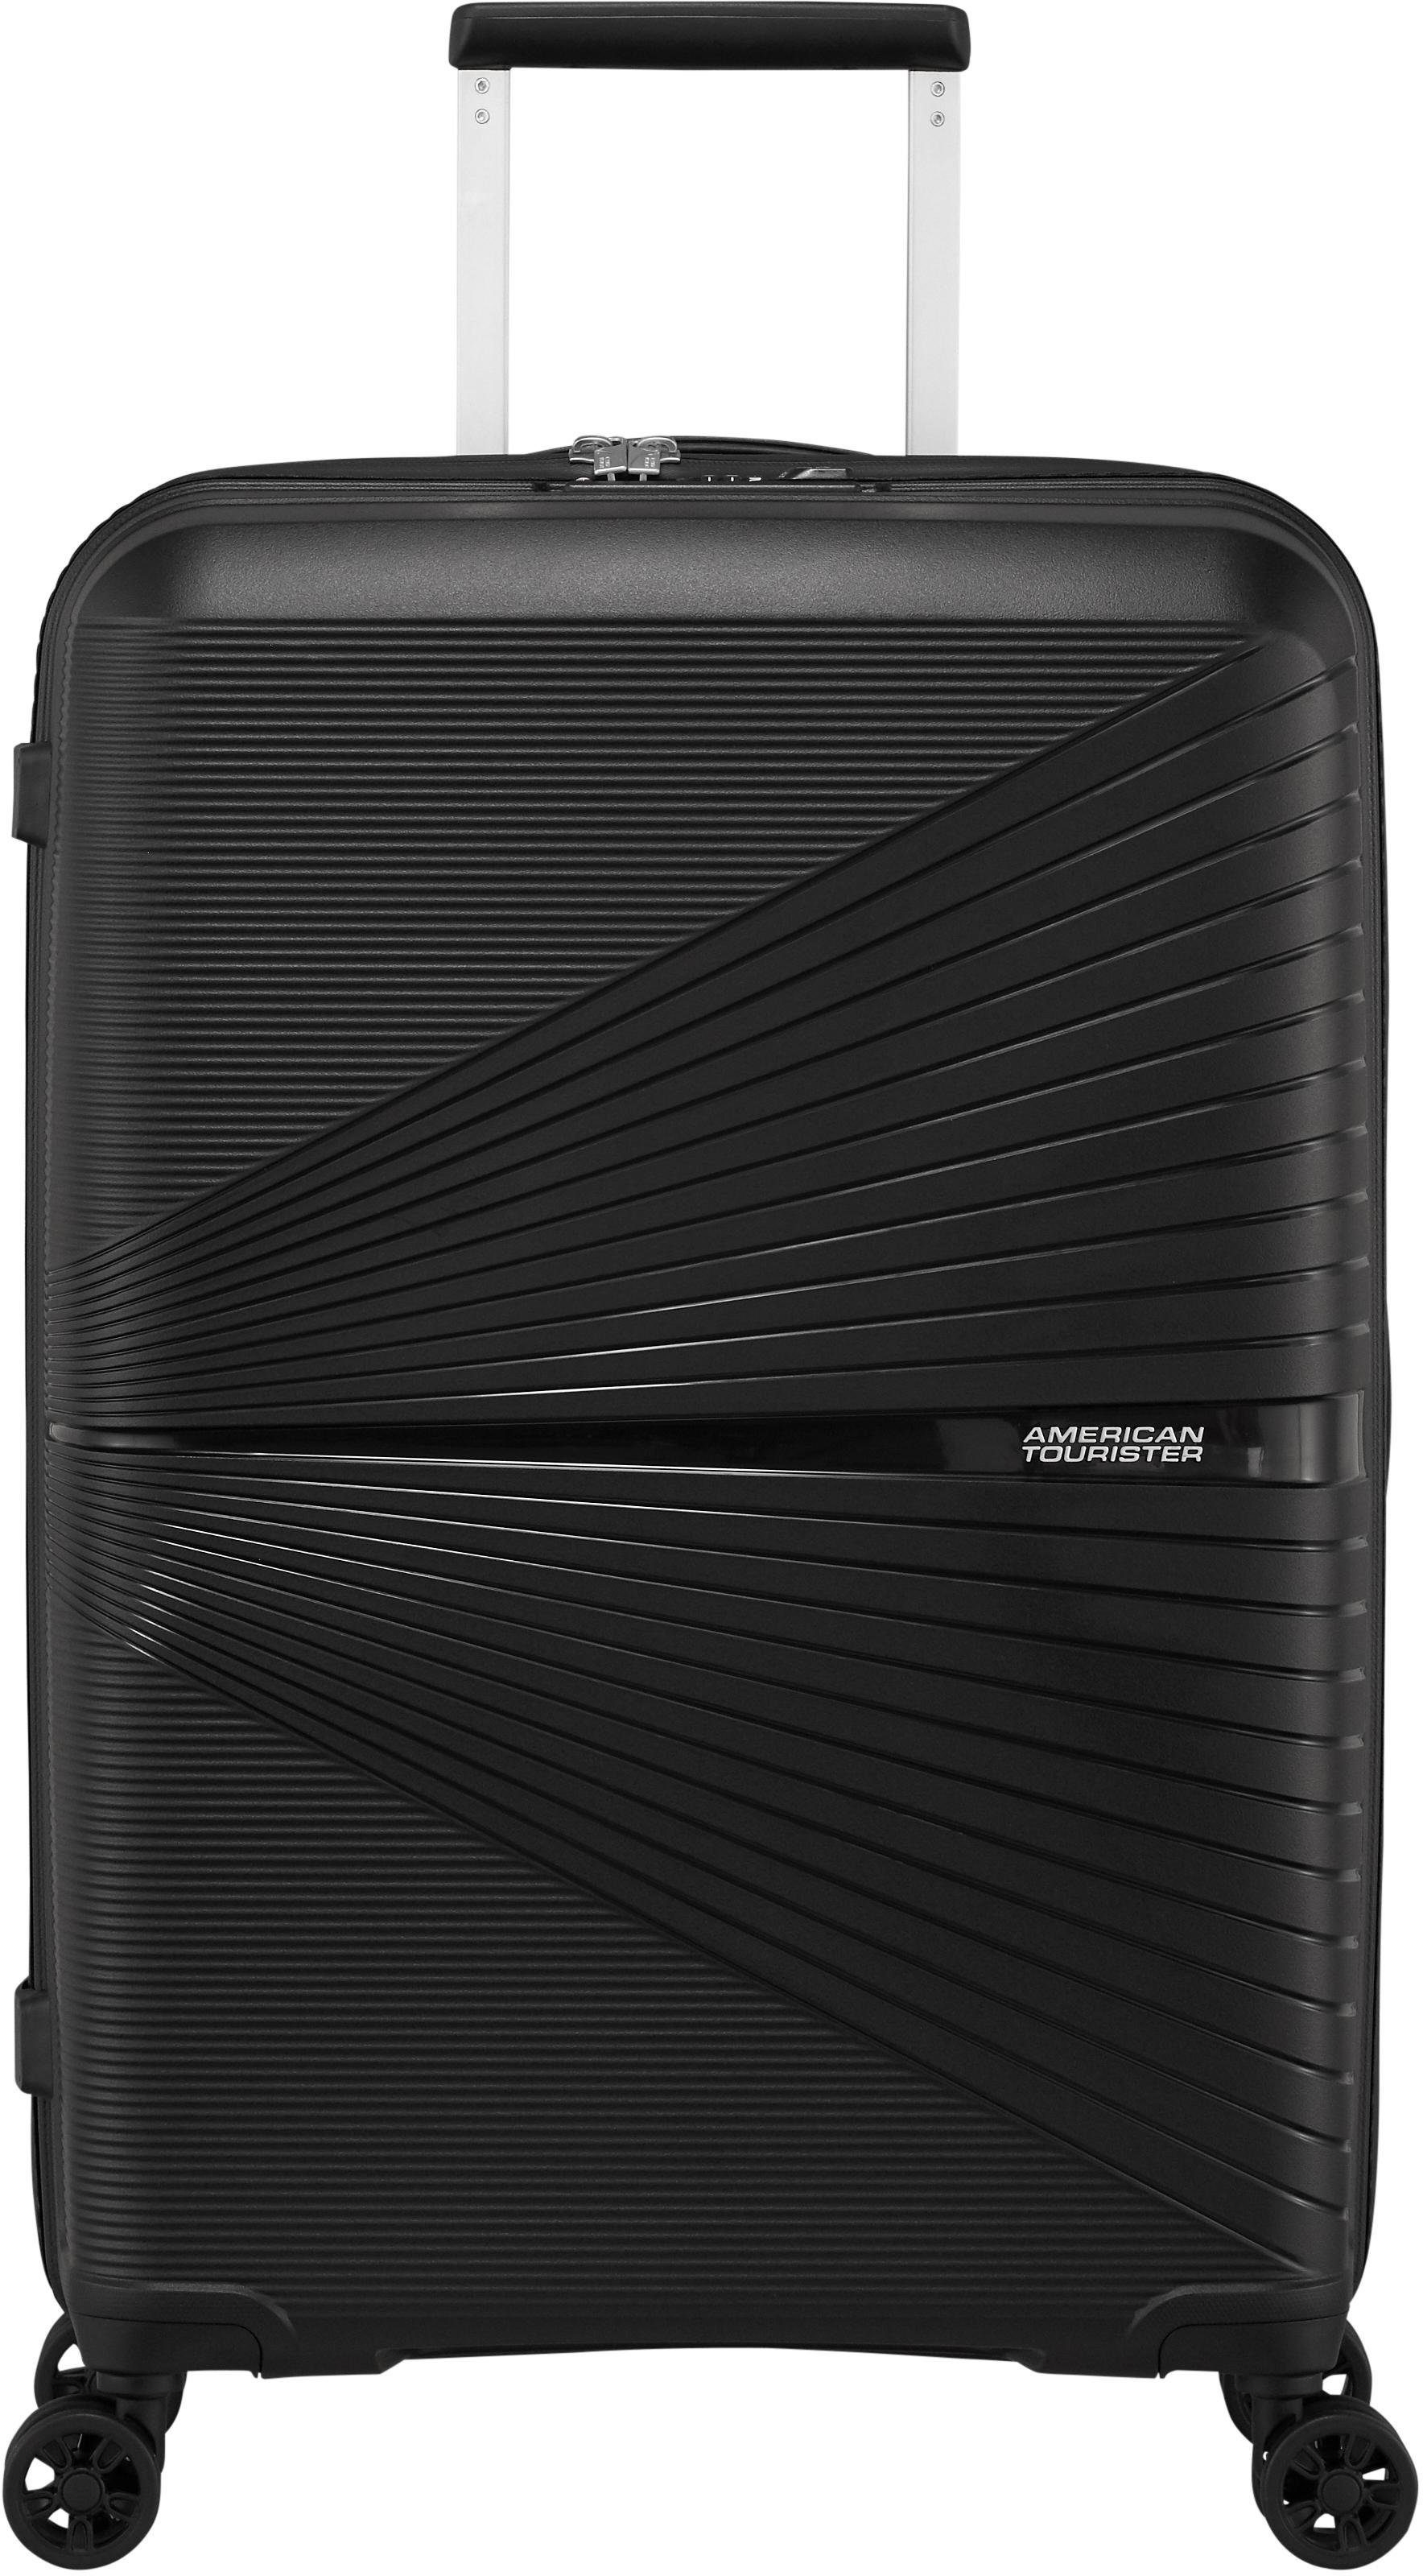 American Tourister® Koffer AIRCONIC Spinner 67, 4 Rollen Onyx Black